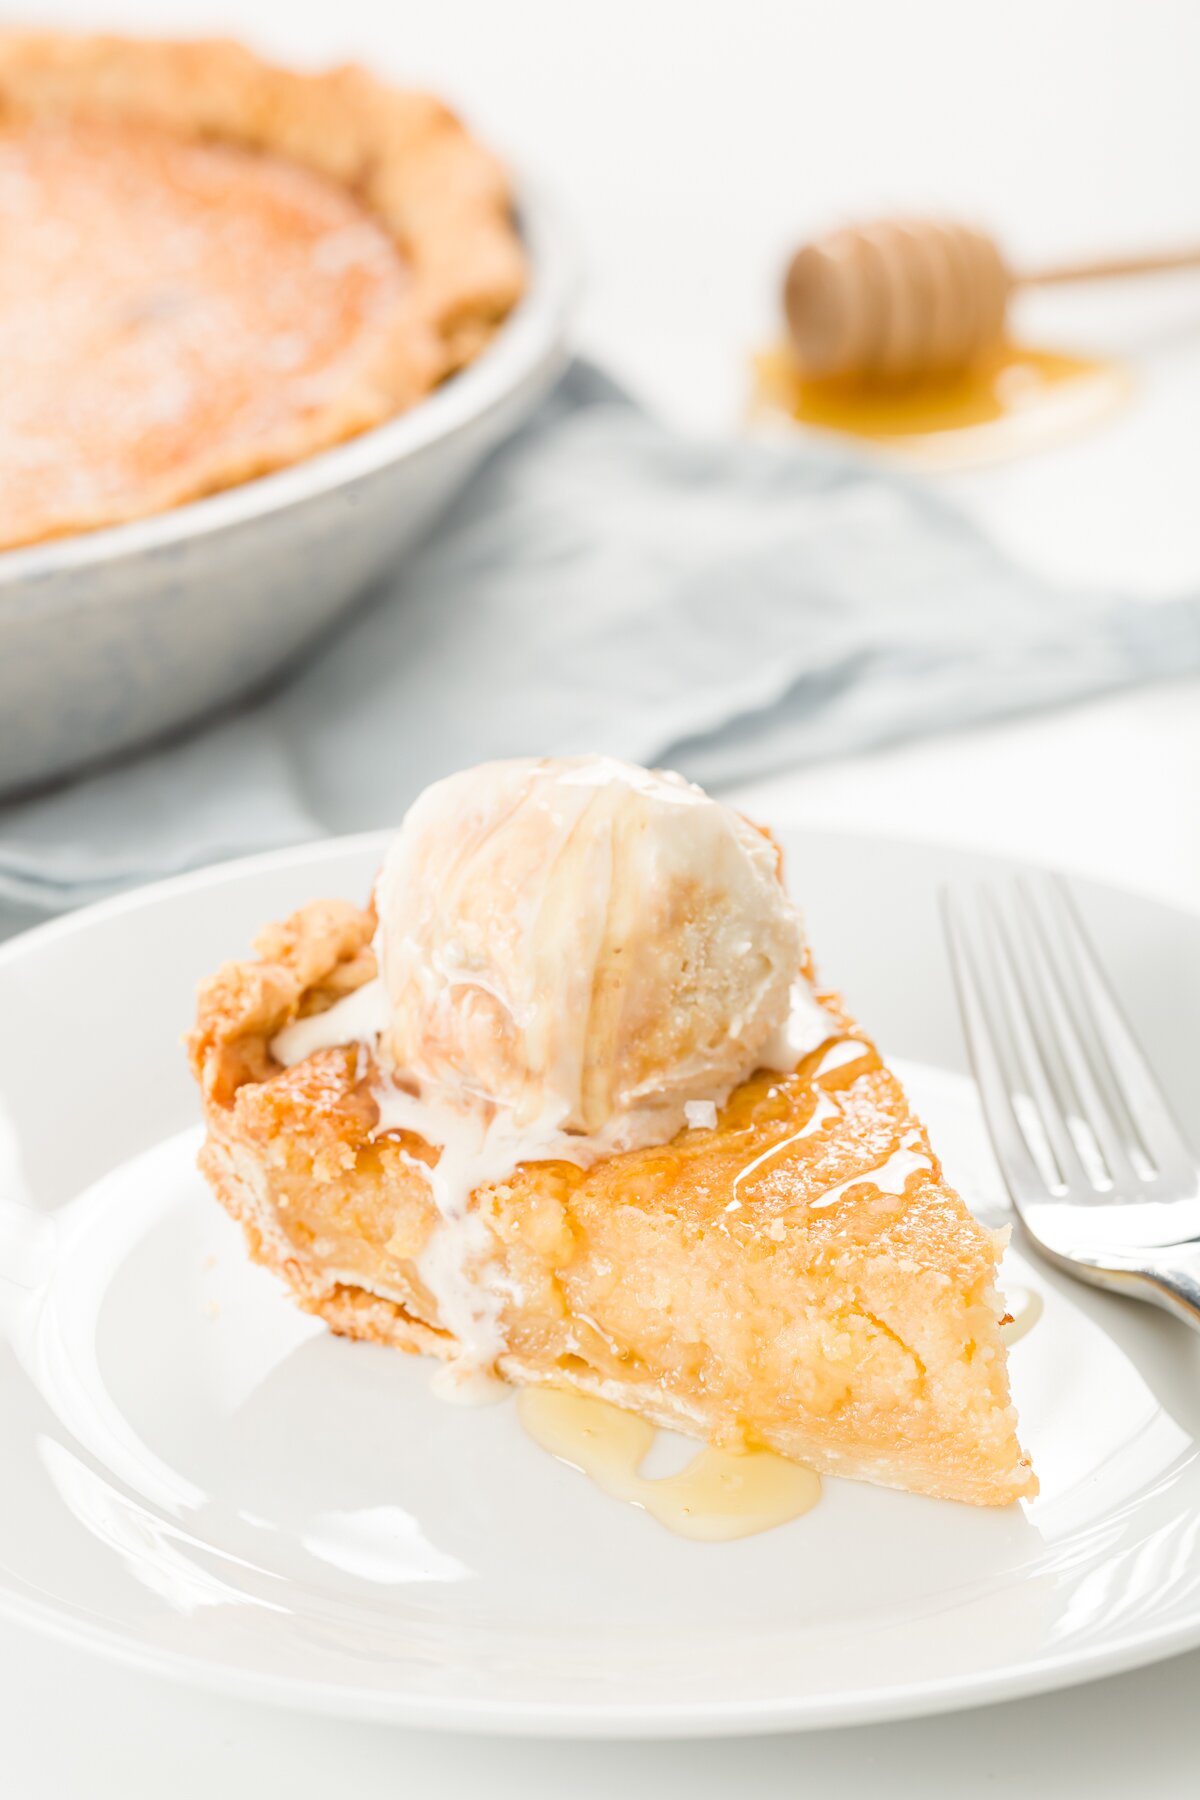 Slice of honey pie on a white plate with a scoop of ice cream on top and a pie in the background